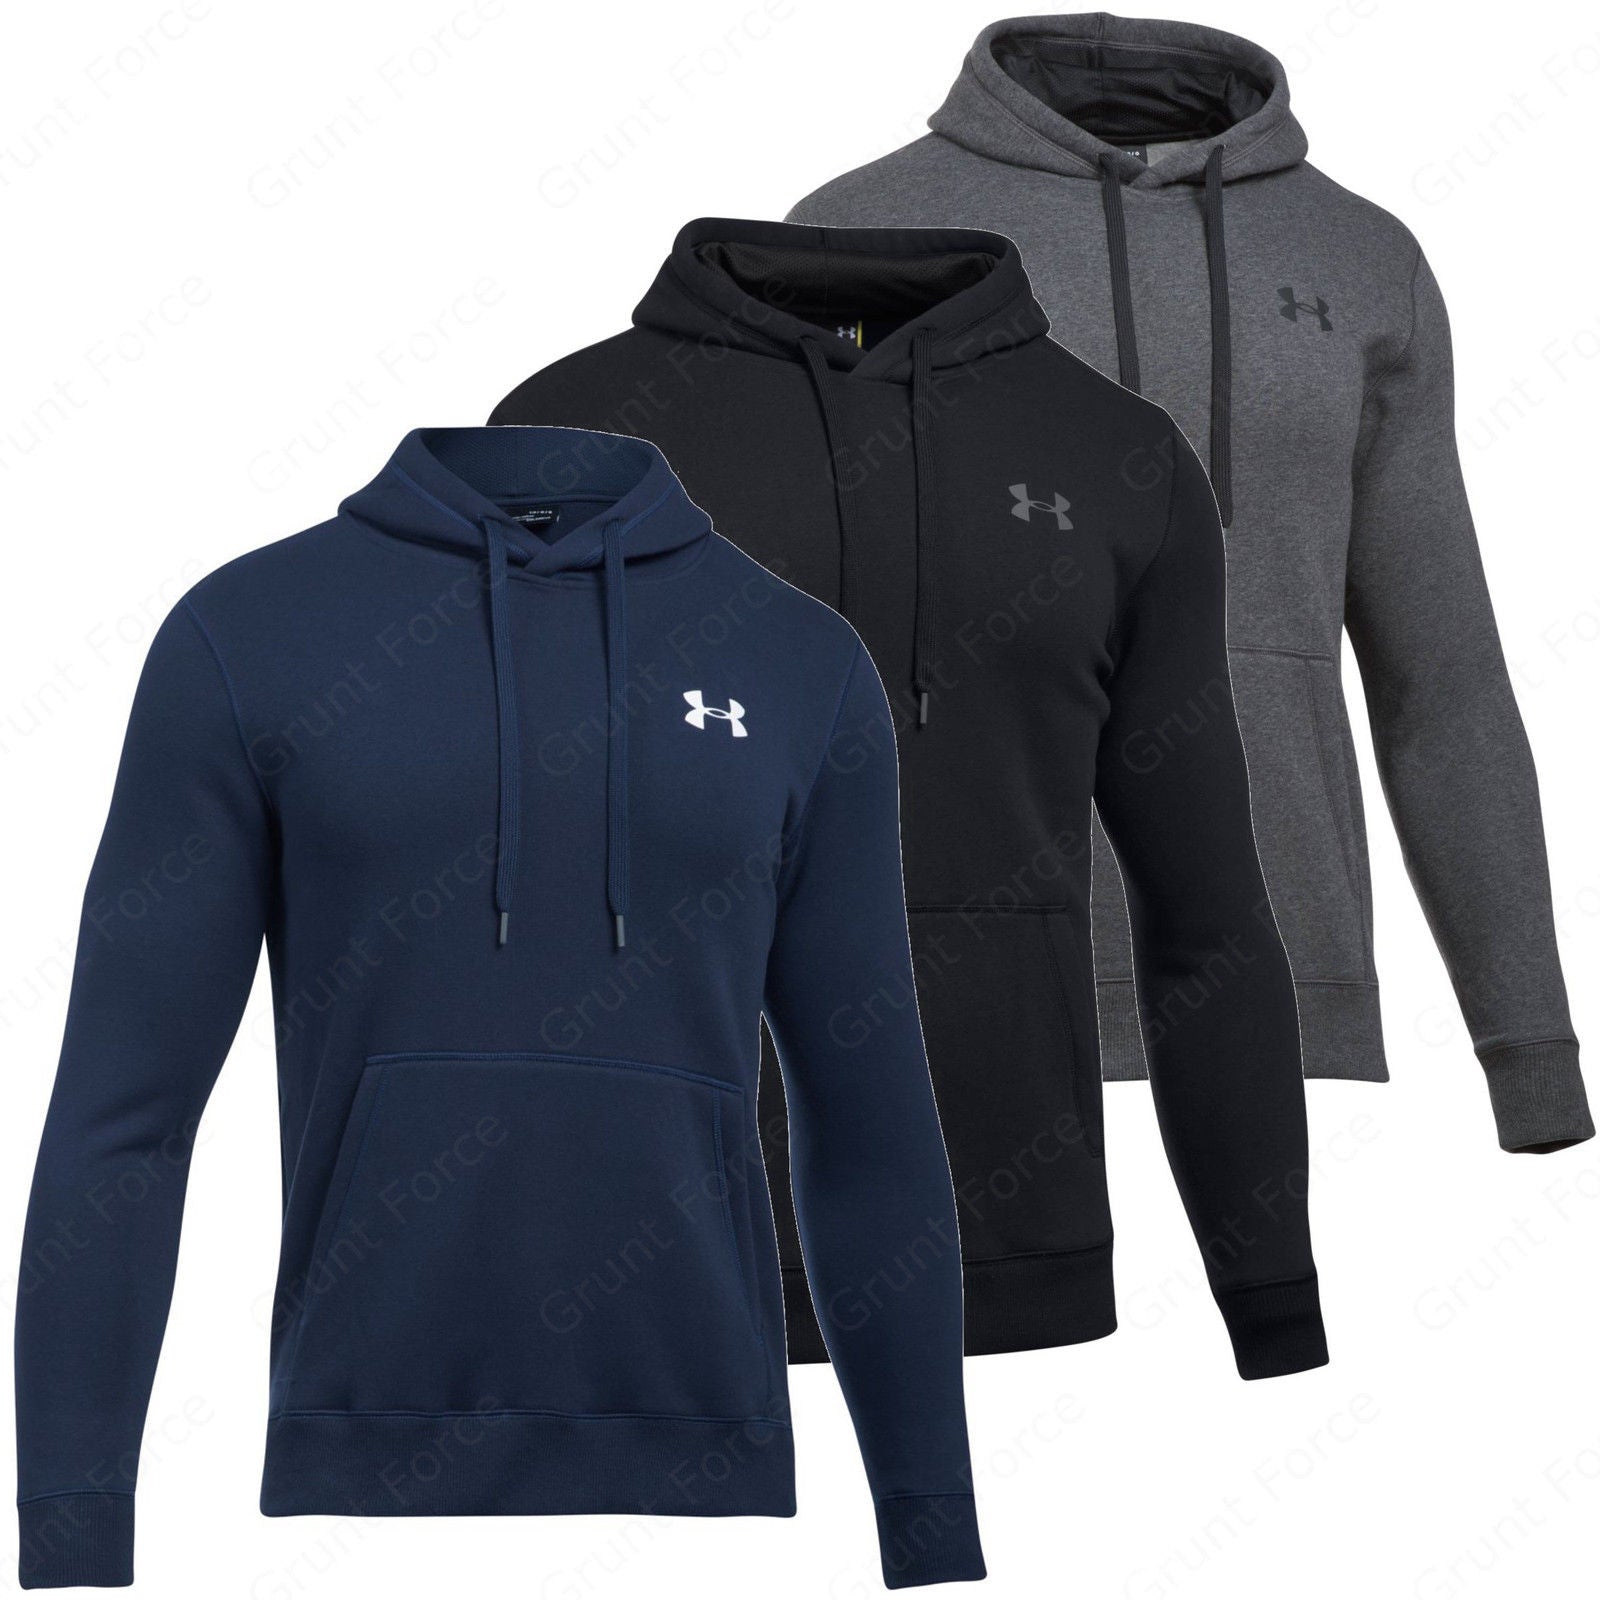 under armour rival fleece fitted hoodie